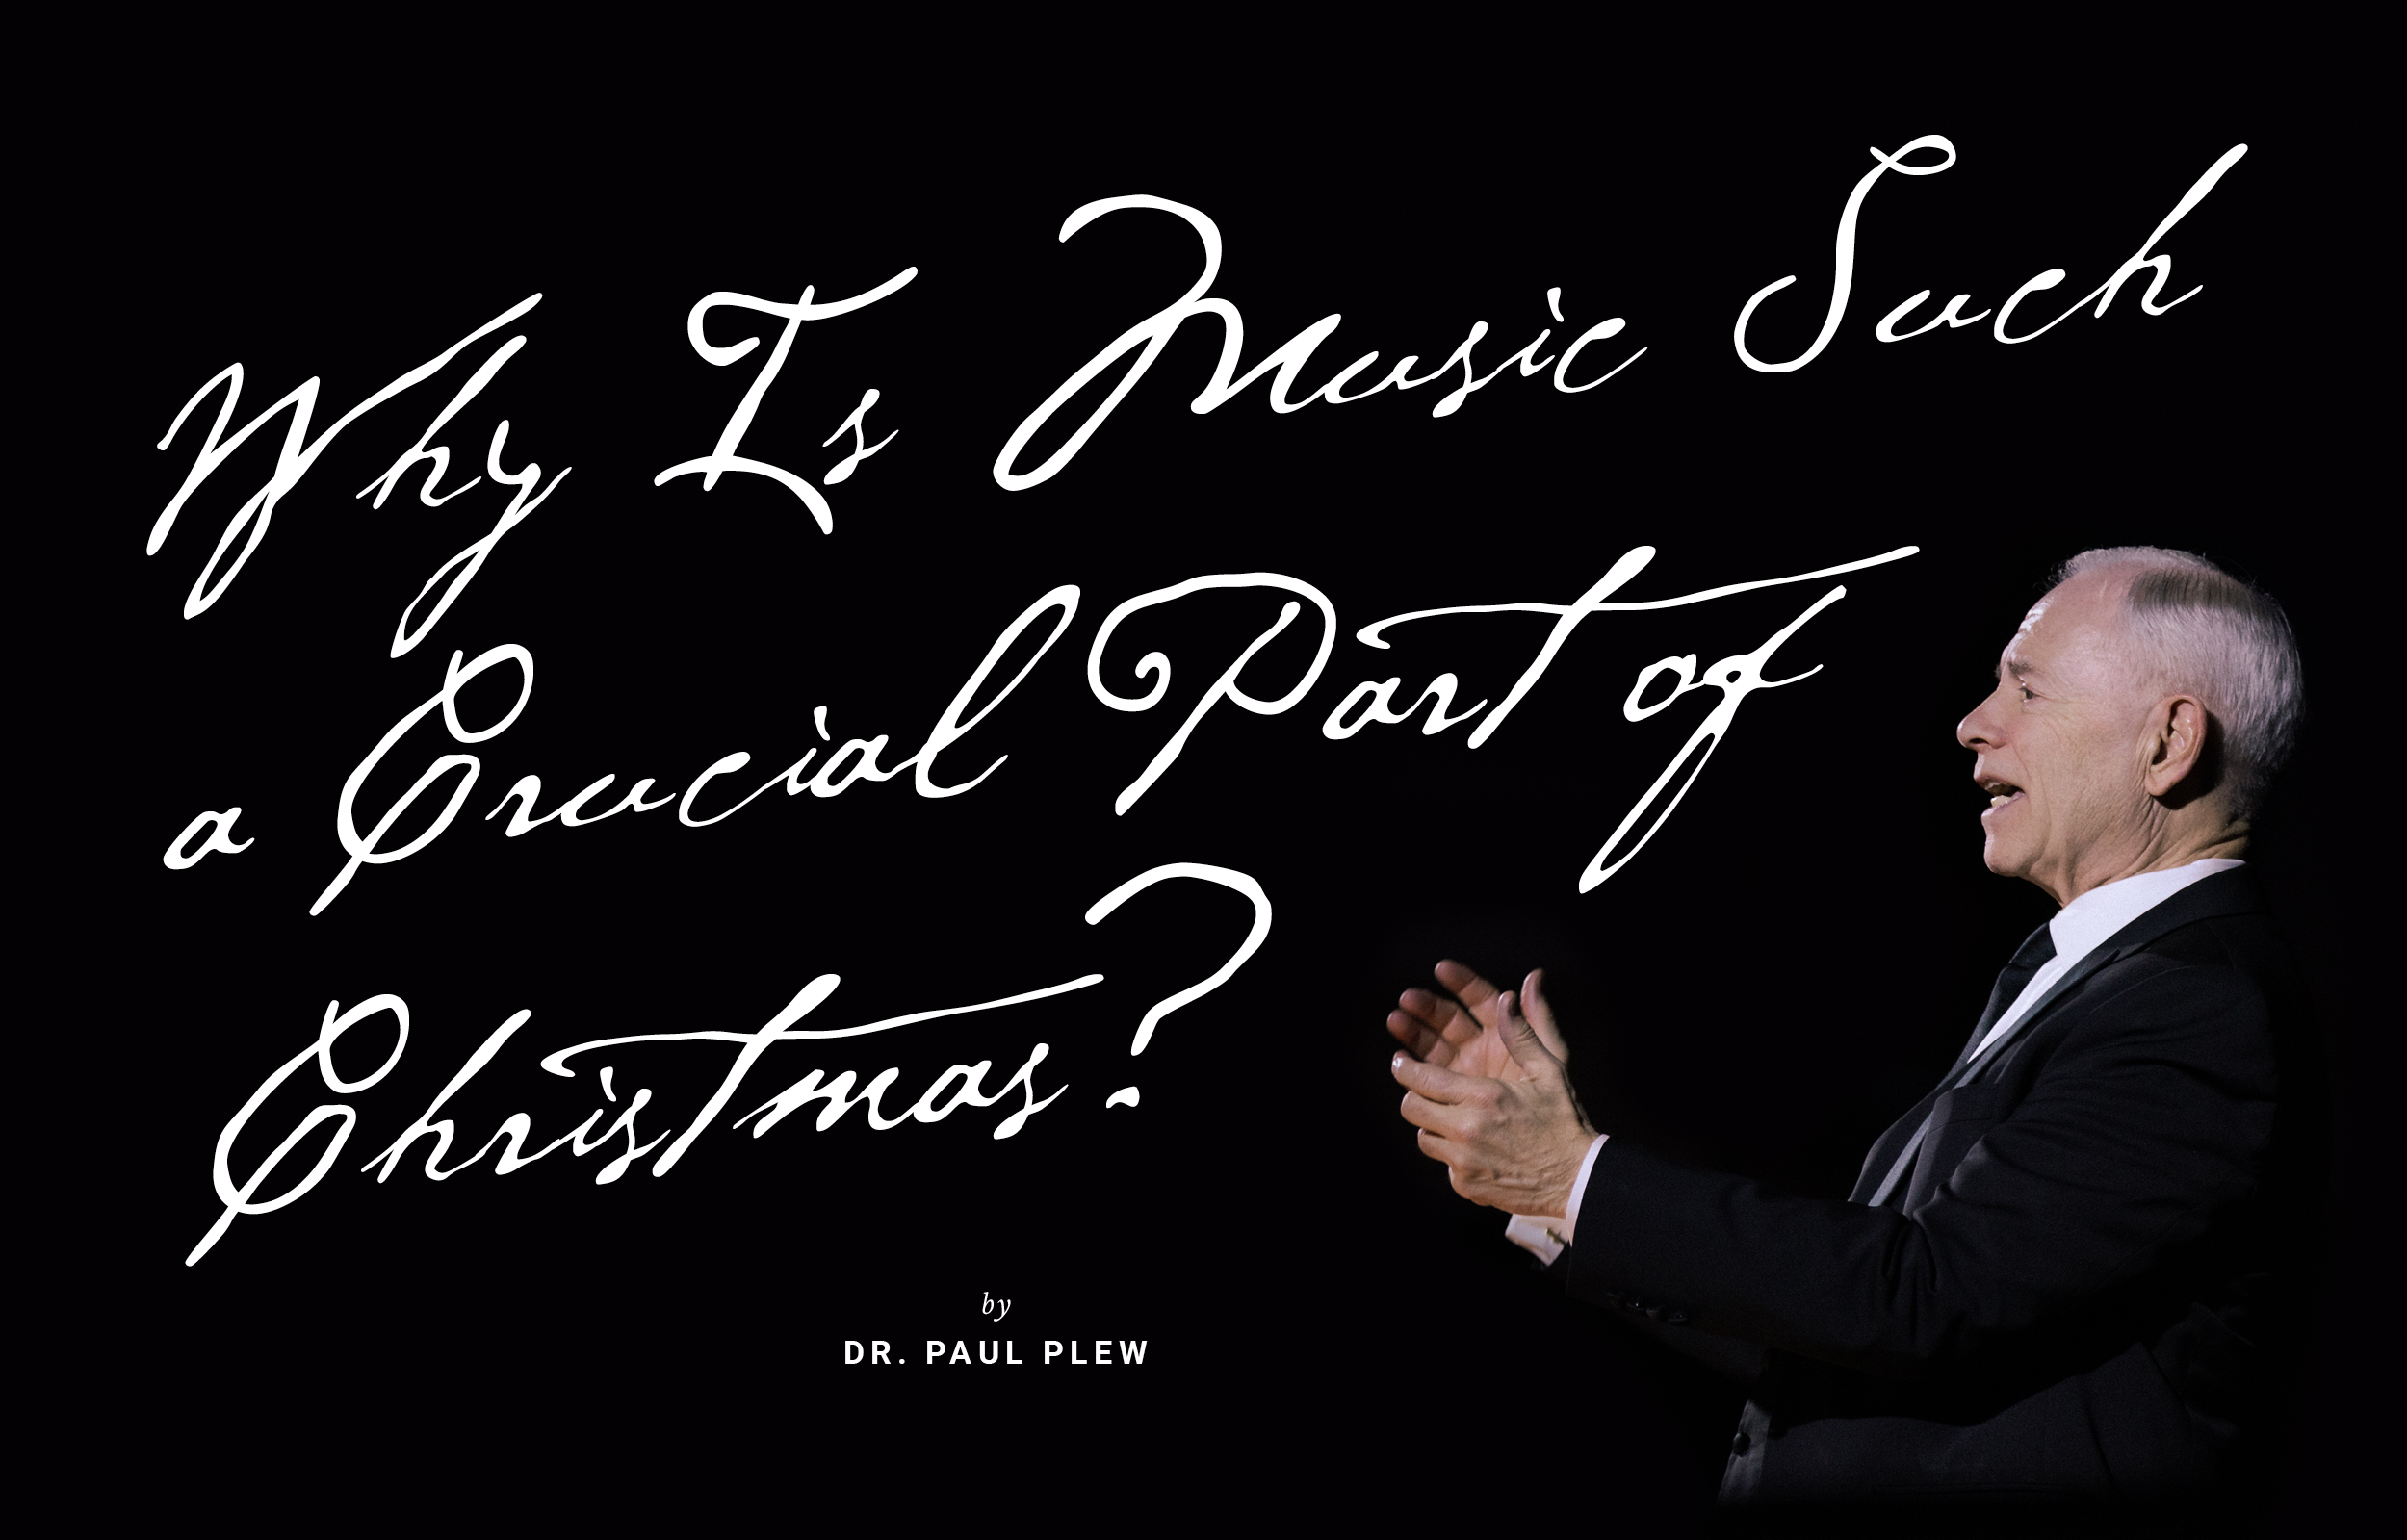 Dr. Paul Plew Explains the Inextricable Link Between Christmas and Music